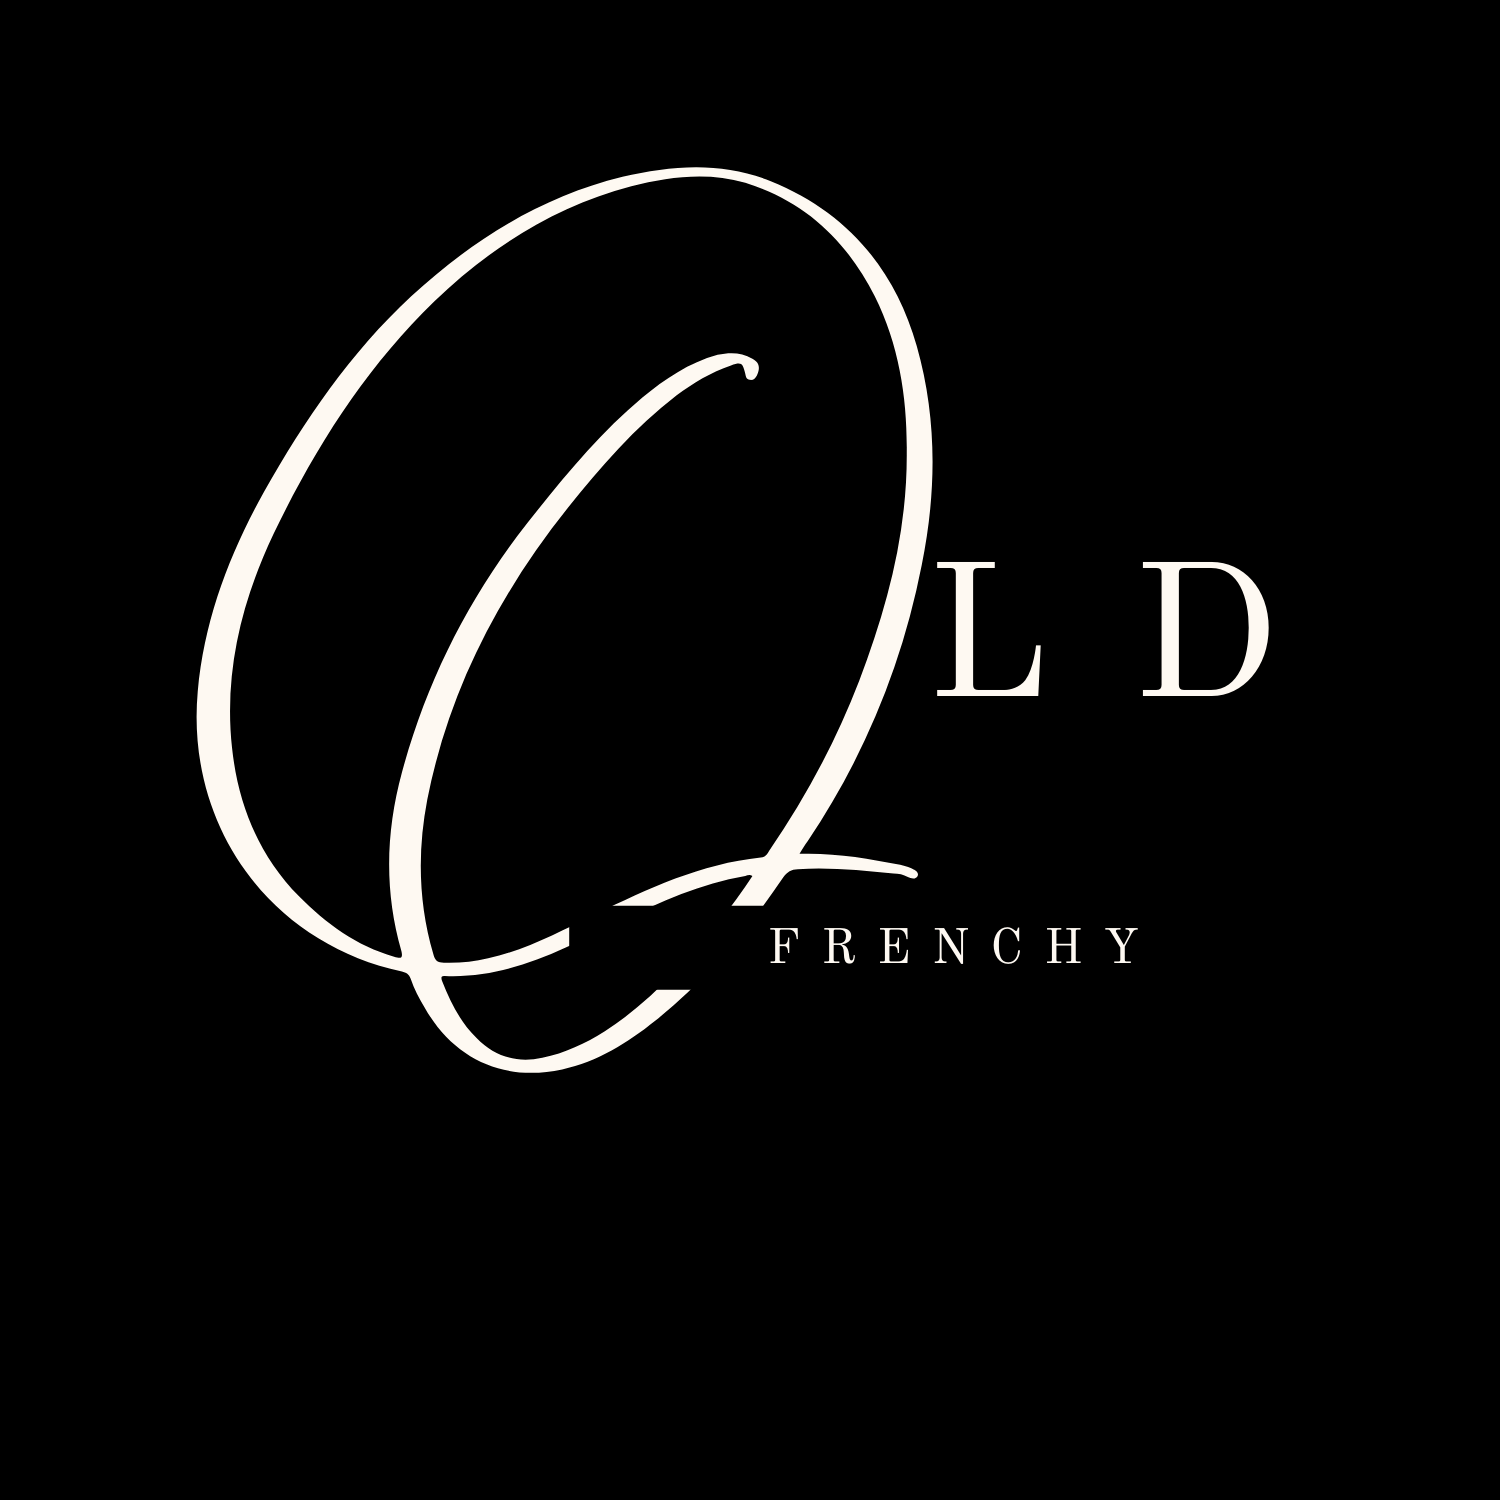 Old Frenchy Logo High Res.png